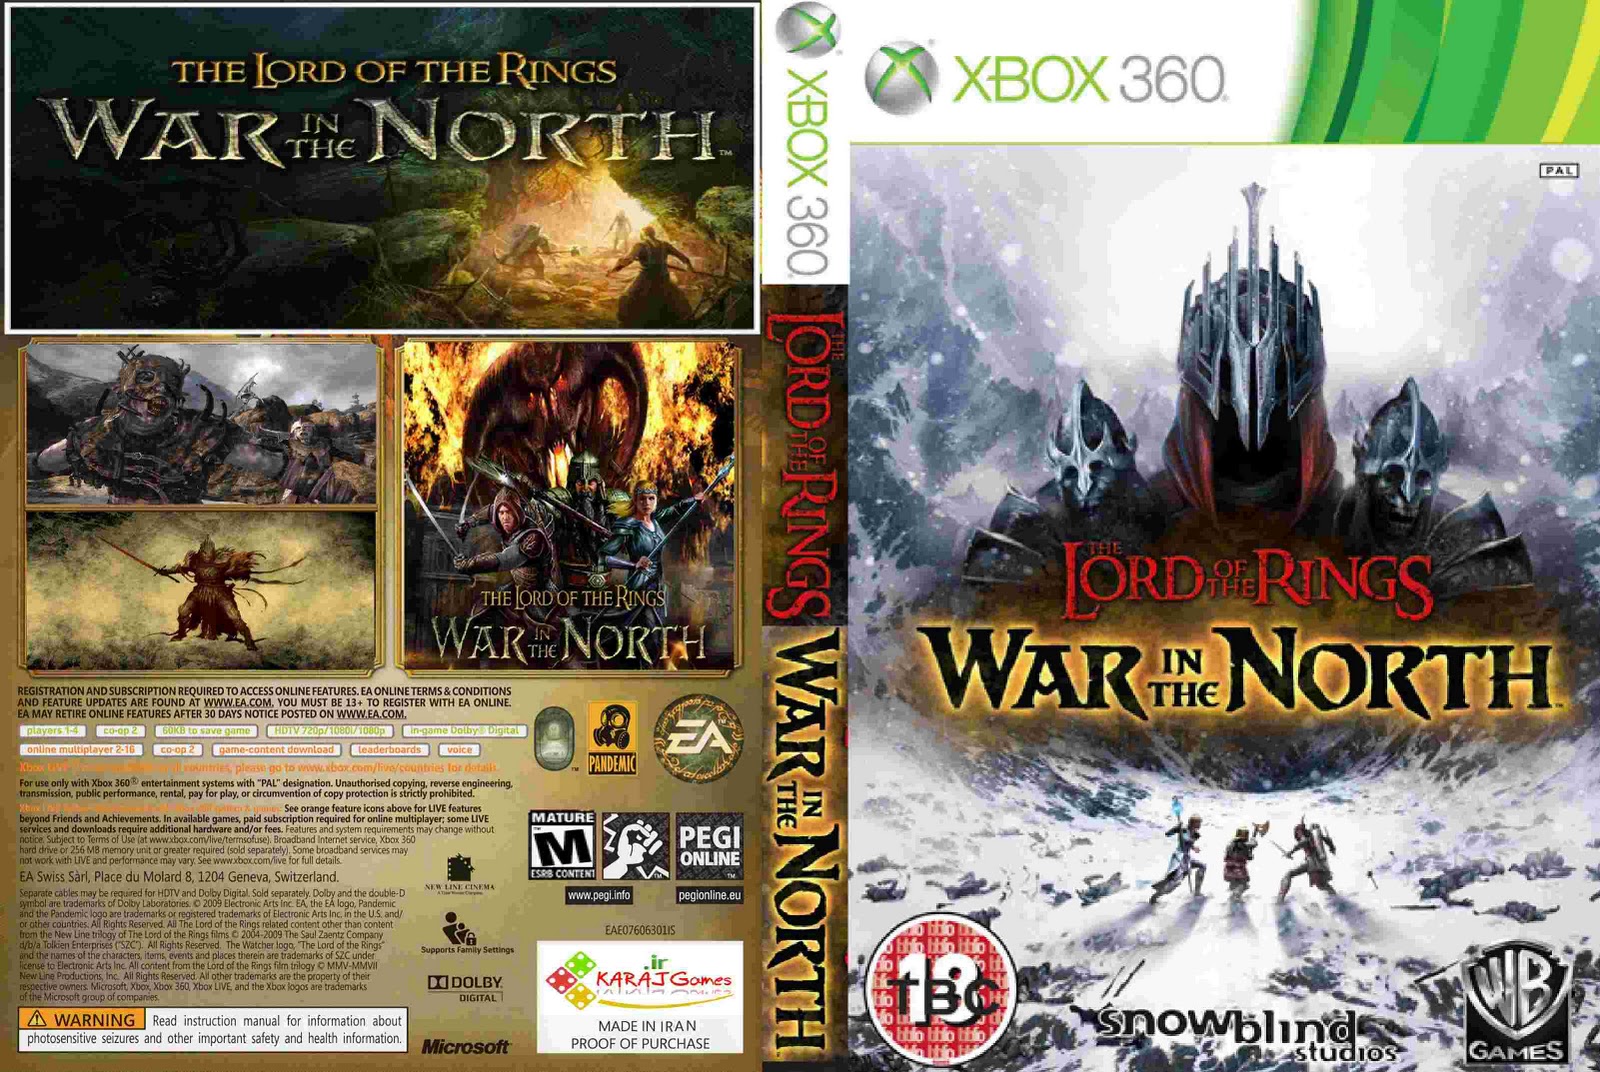 Lord of the rings war in the north купить ключ steam фото 66